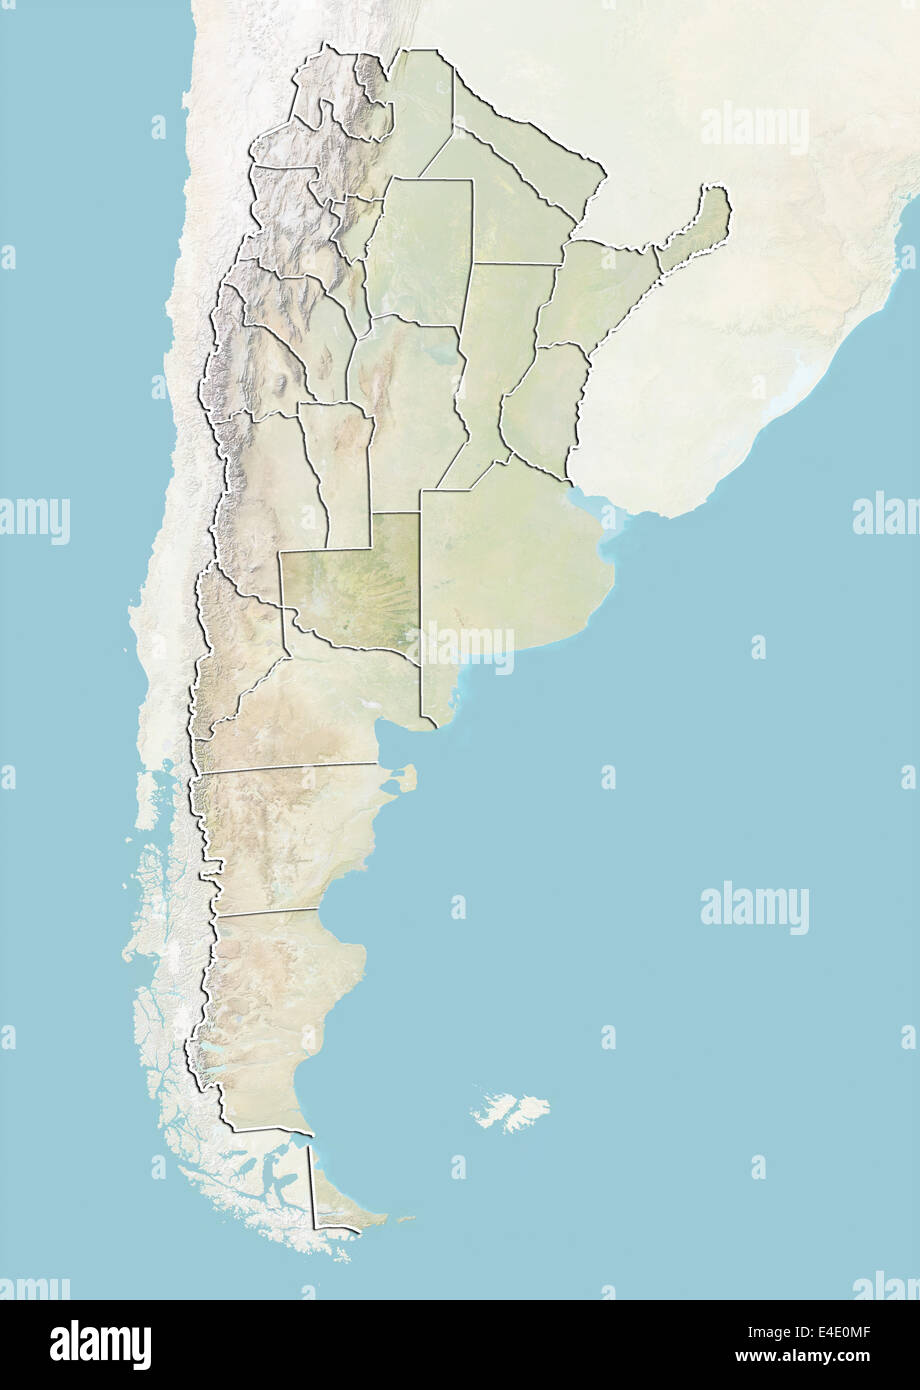 Argentina and the Province of La Pampa, Relief Map Stock Photo